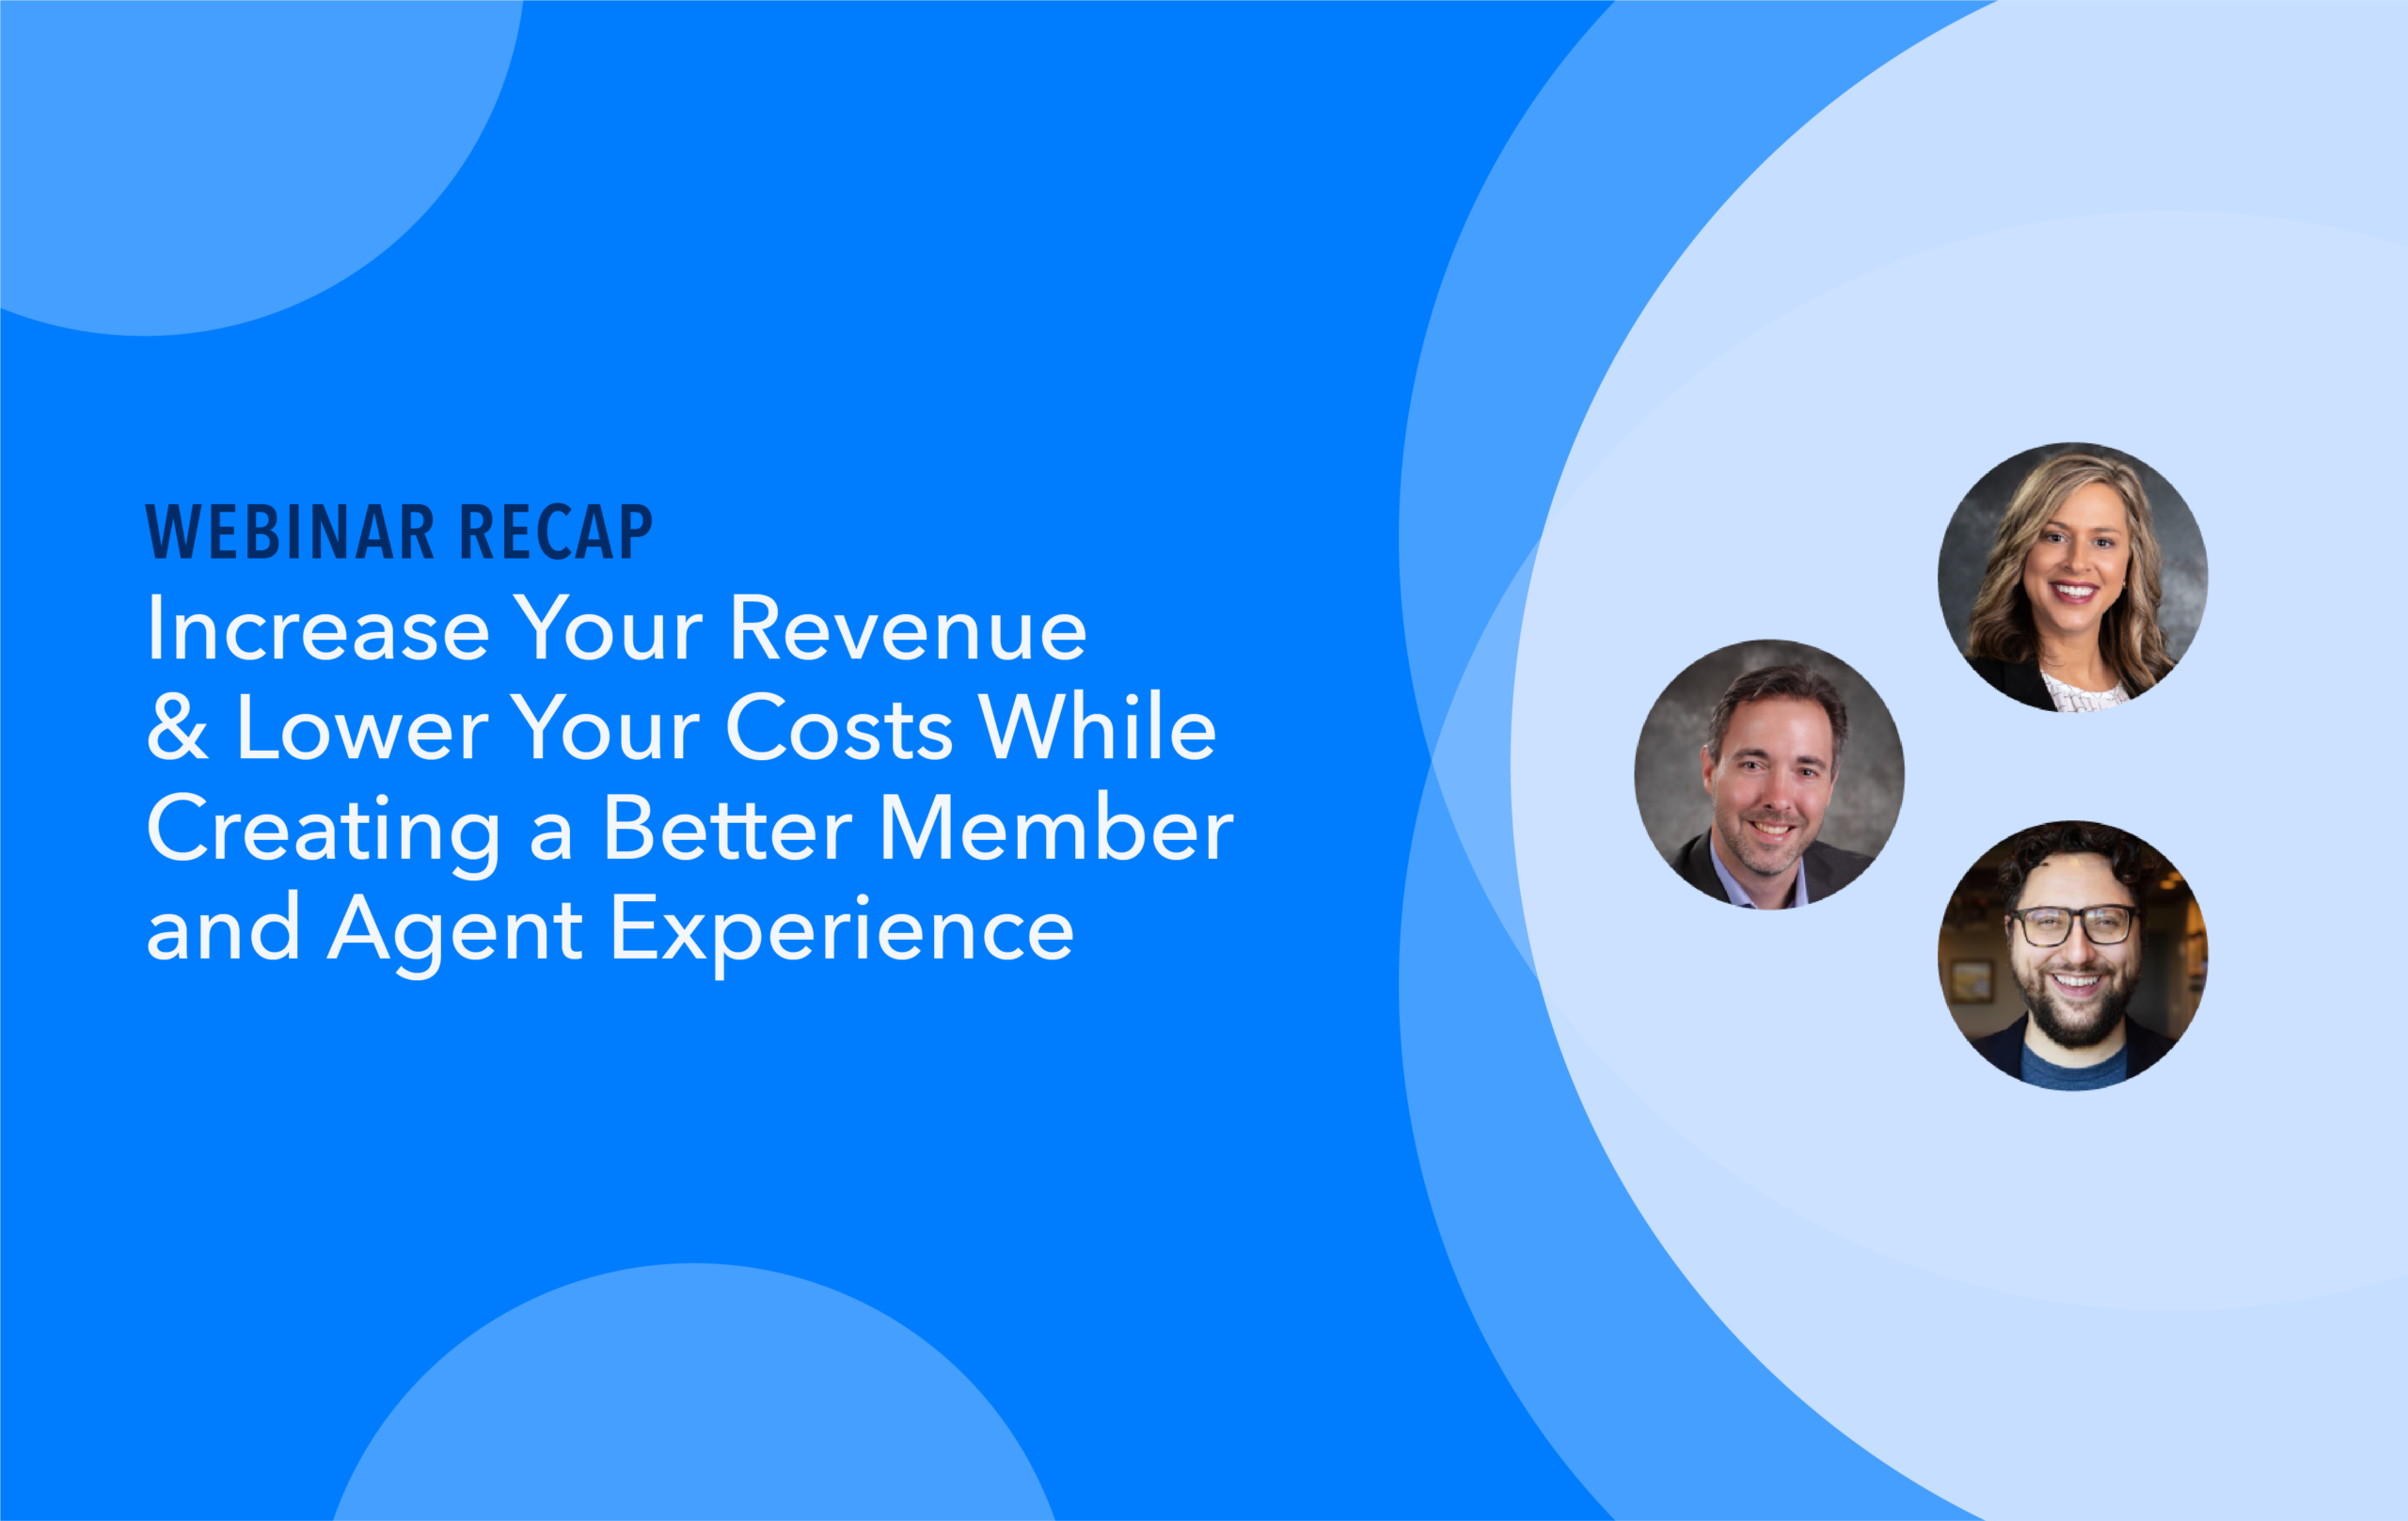 Recap: Increase Your Revenue and Lower Your Costs While Creating a Better Member and Agent Experience